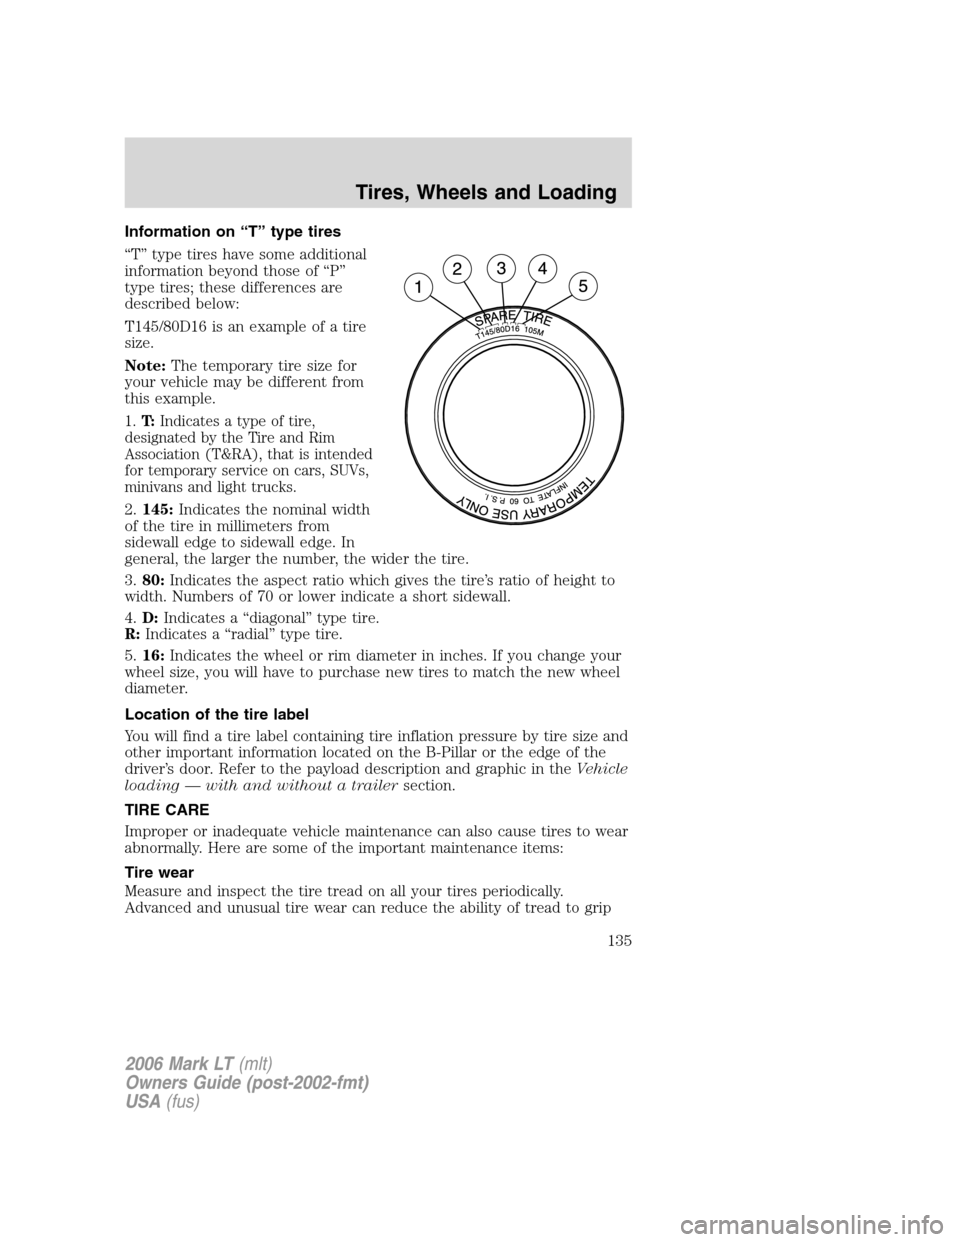 LINCOLN MARK LT 2006  Owners Manual Information on “T” type tires
“T” type tires have some additional
information beyond those of “P”
type tires; these differences are
described below:
T145/80D16 is an example of a tire
size